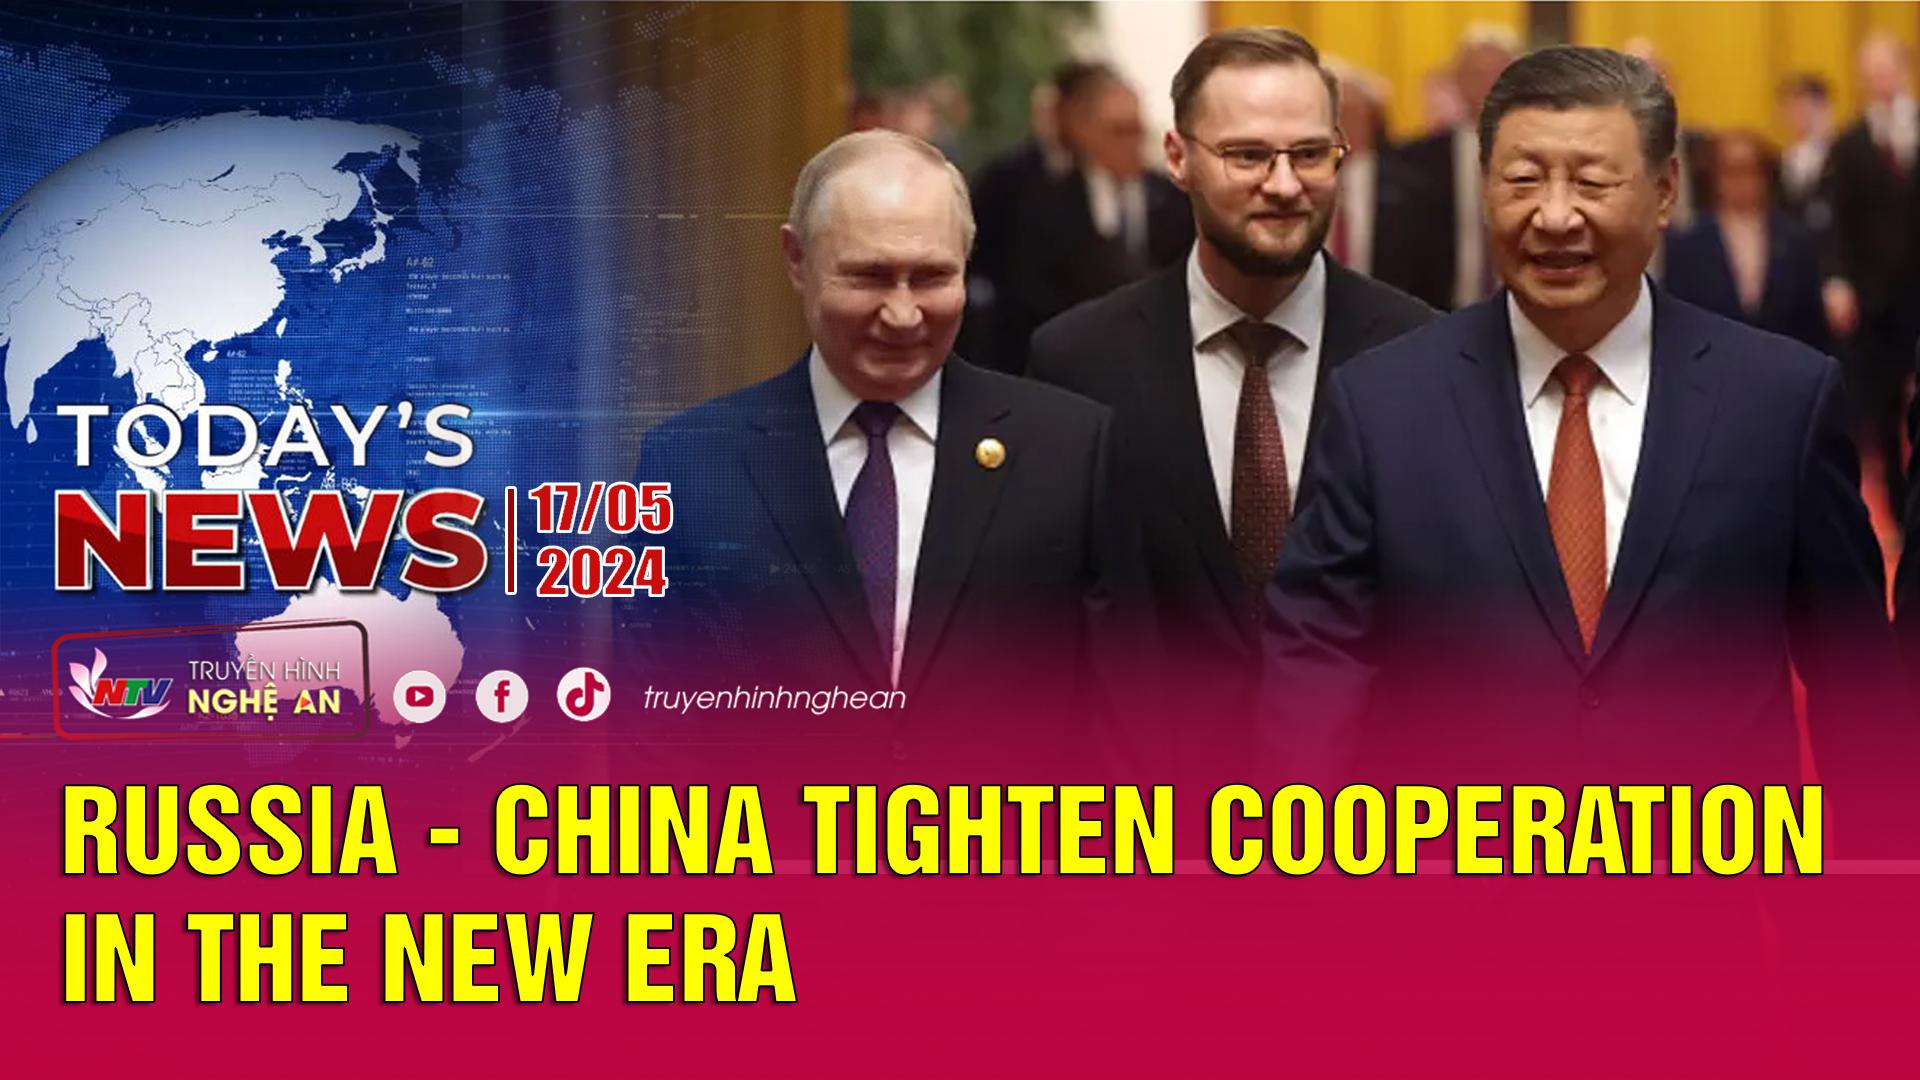 Today's News - 17/05/2024:  Russia - China tighten cooperation in the new era